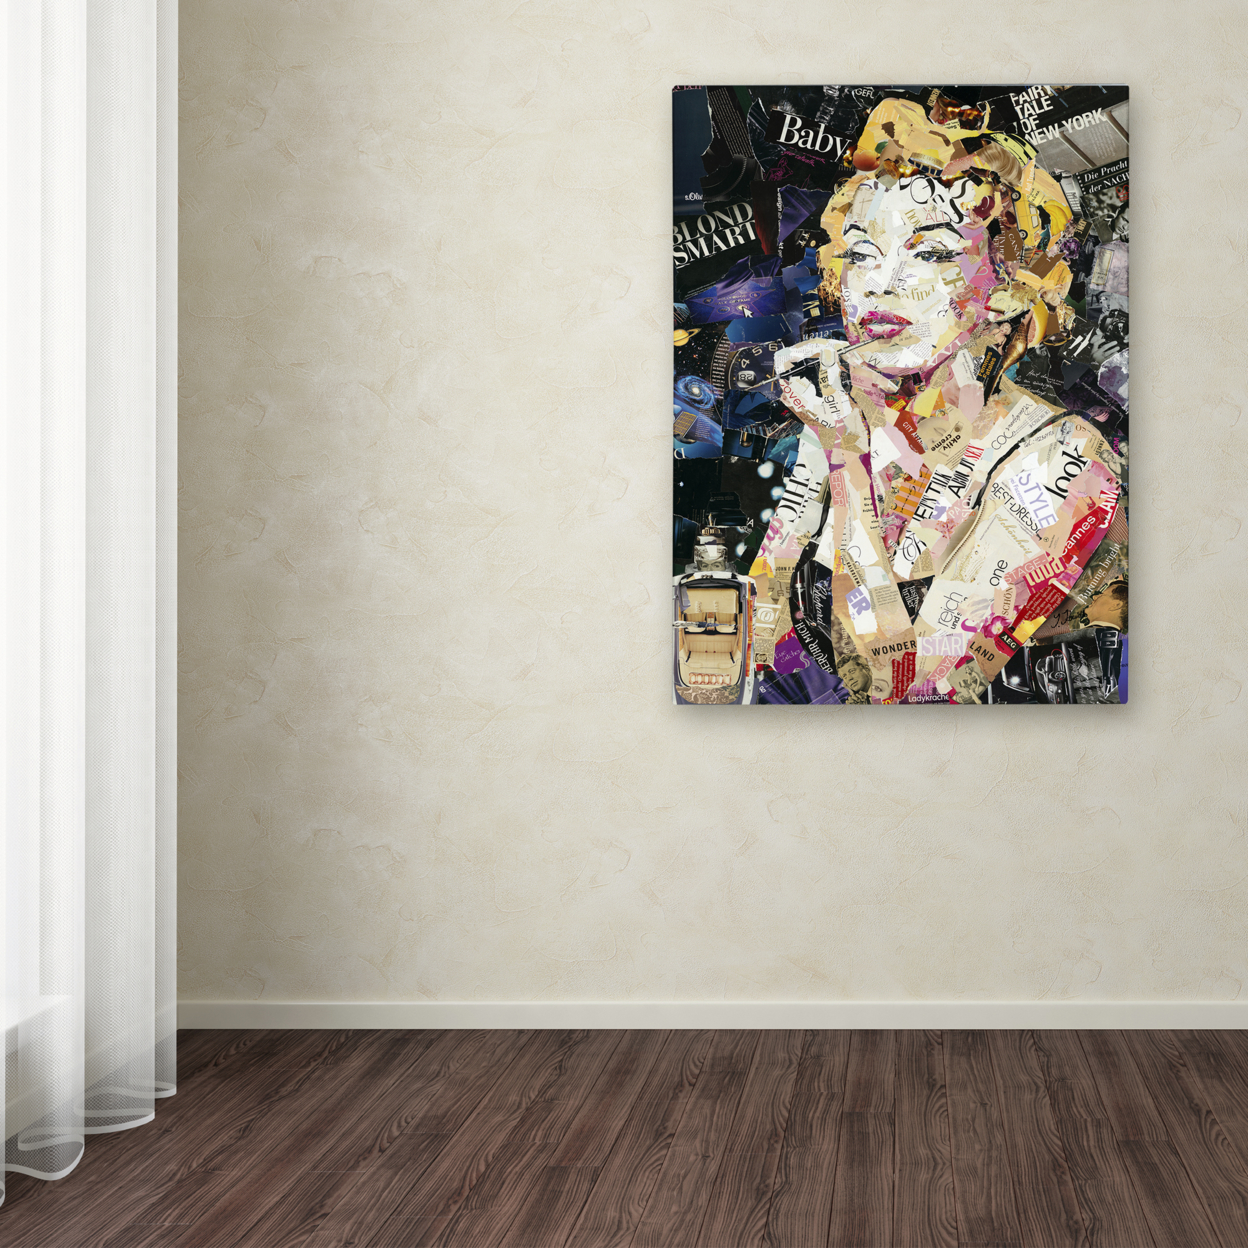 Ines Kouidis 'Blond Smart Baby' Canvas Wall Art 35 X 47 Inches